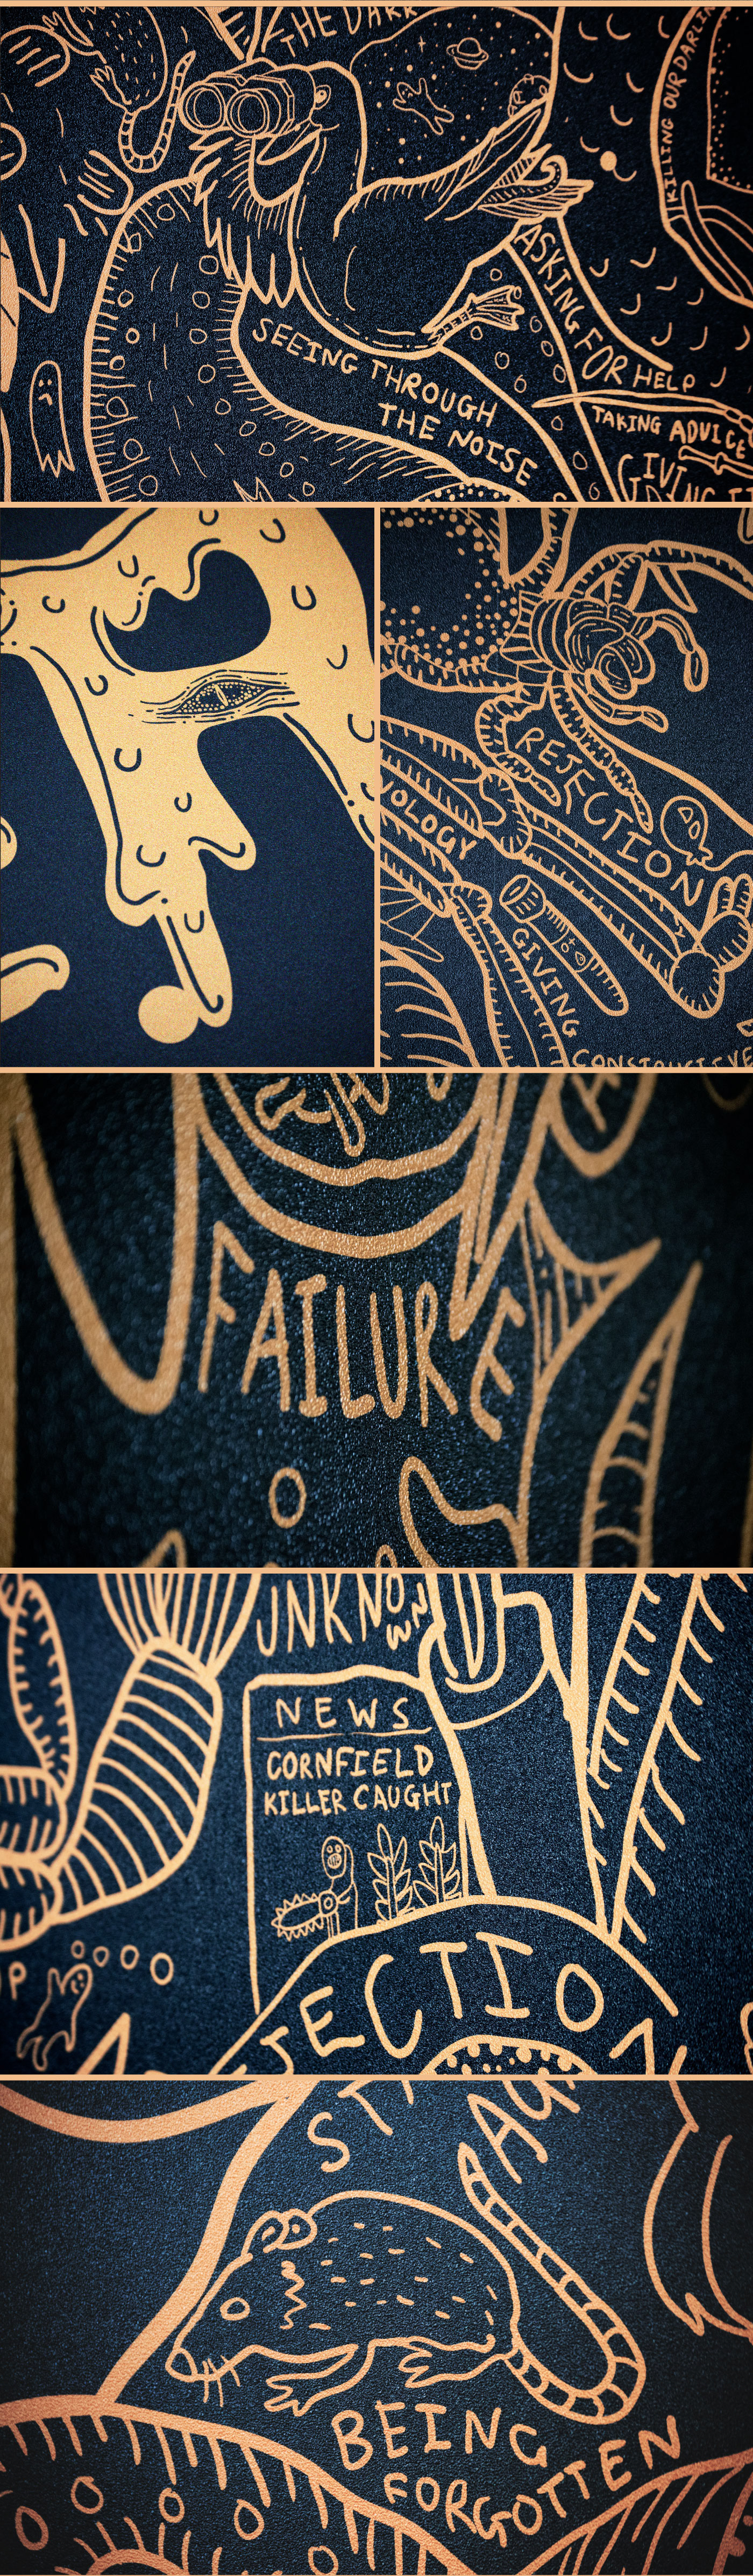 Mural Company Branding branding  brand essence Drawing  conceptual fear wall art monster black and gold